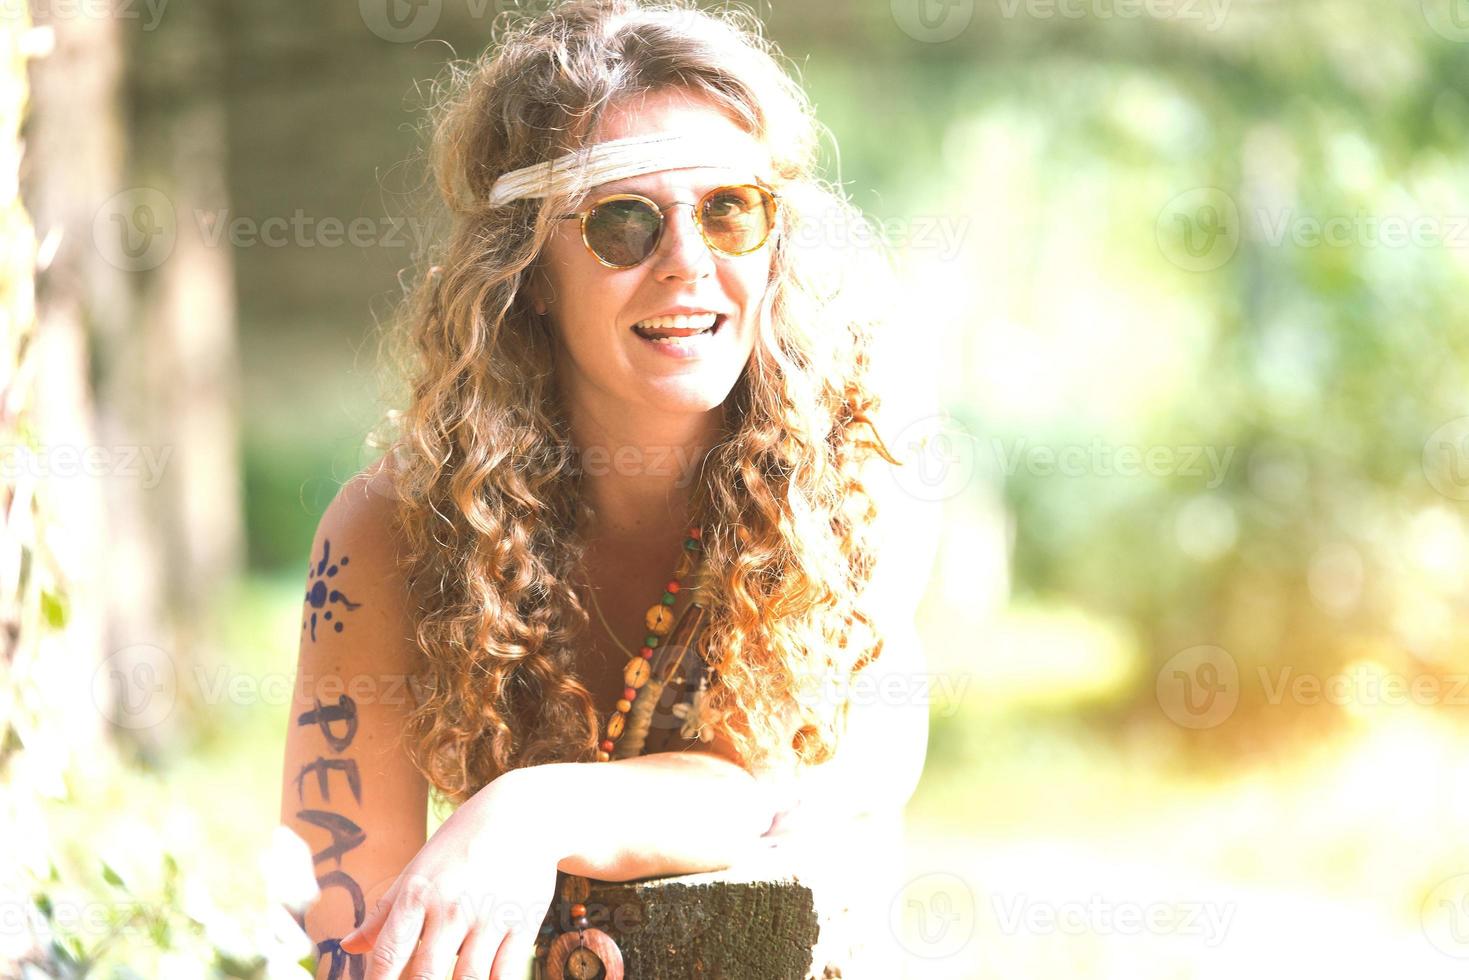 Pretty free hippie girl. Peace. Body painting. - Vintage photo effect